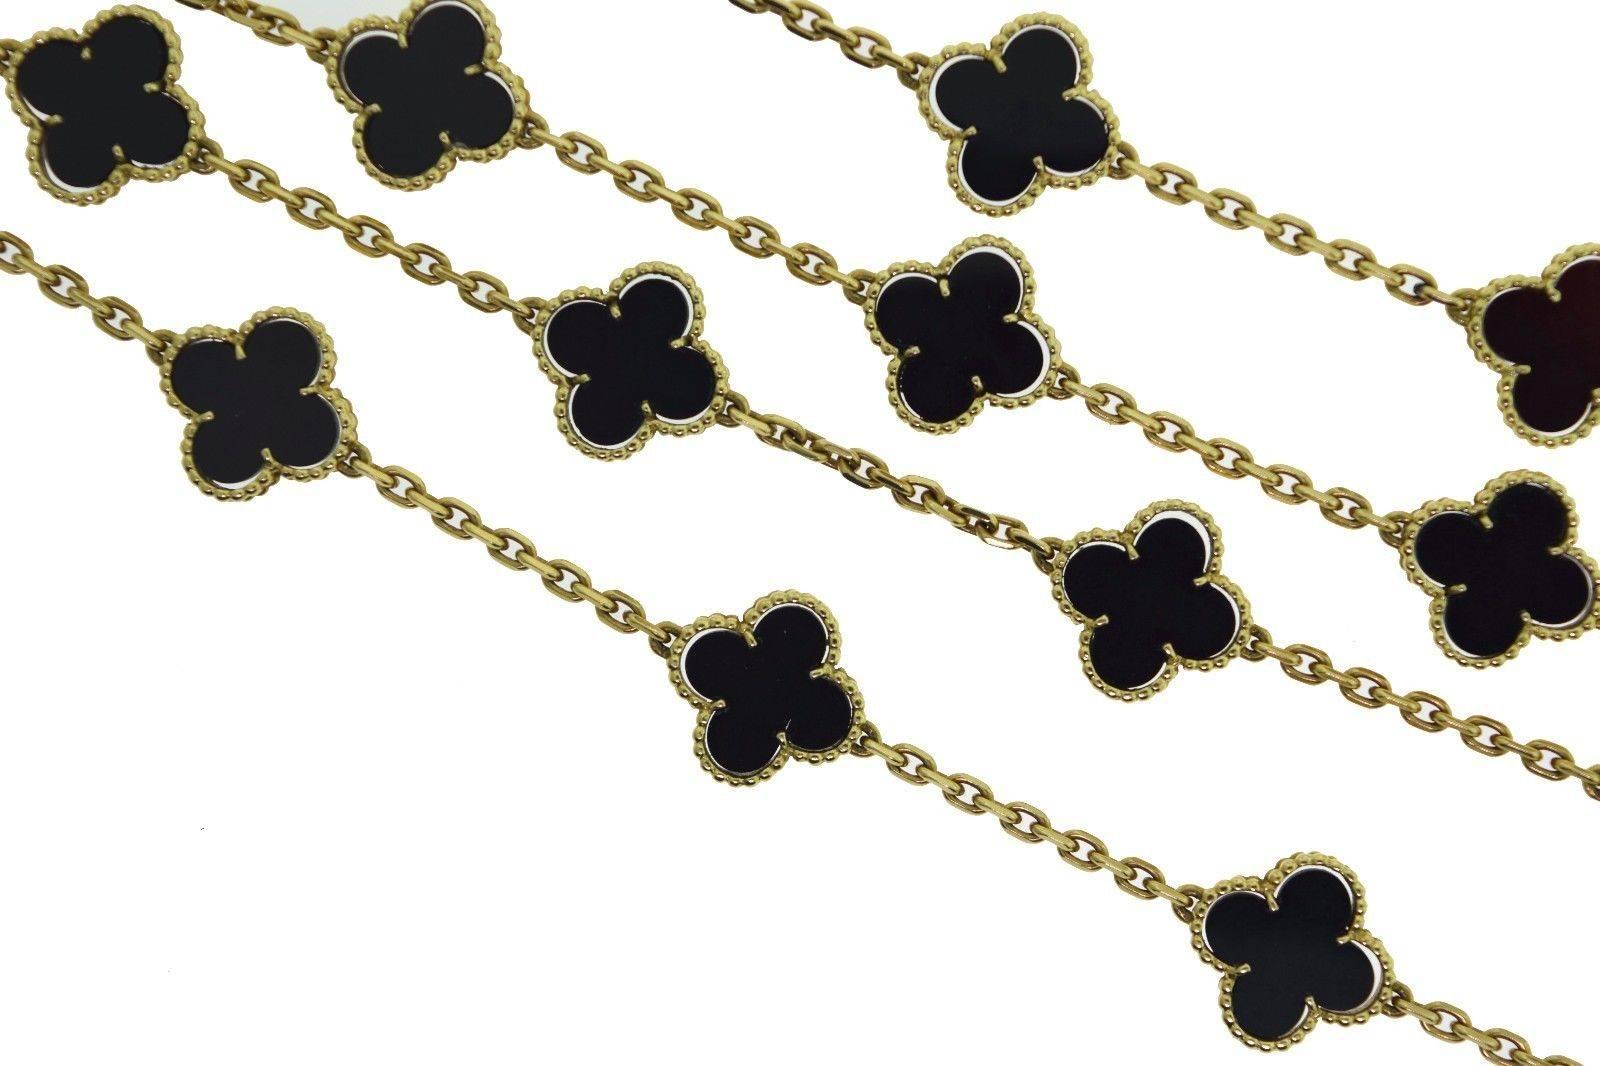 Designer: Van Cleef & Arpels
Collection: Vintage Alhambra
Metal: Yellow Gold
Metal Purity: 18k
Stones: Black Onyx
Chain Length: approx 32.5